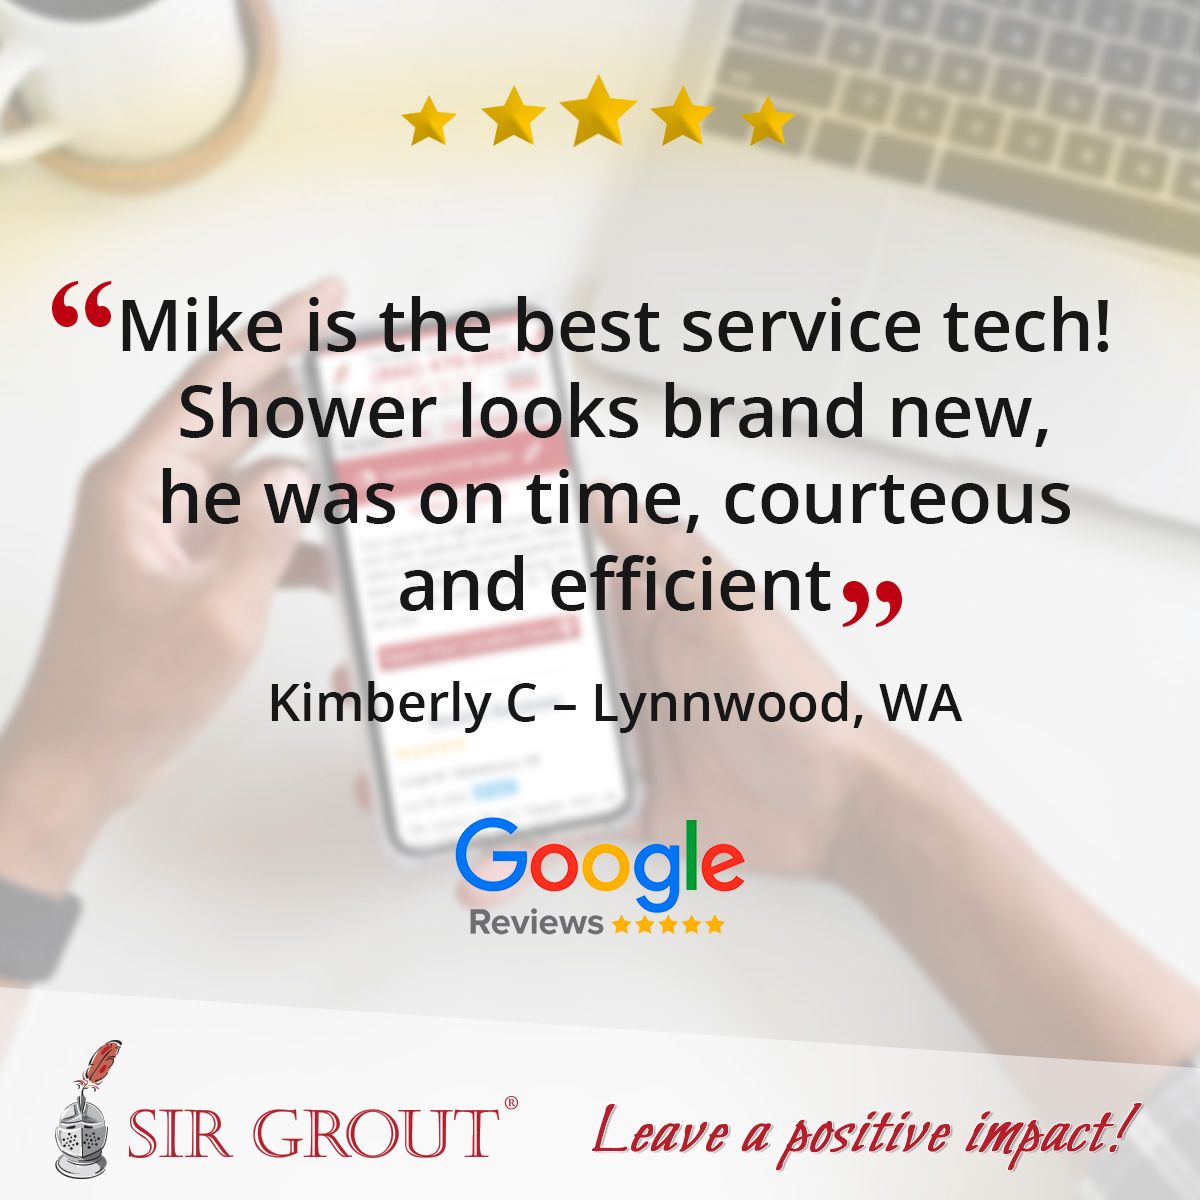 Mike is the best service tech! Shower looks brand new, he was on time, courteous and efficient